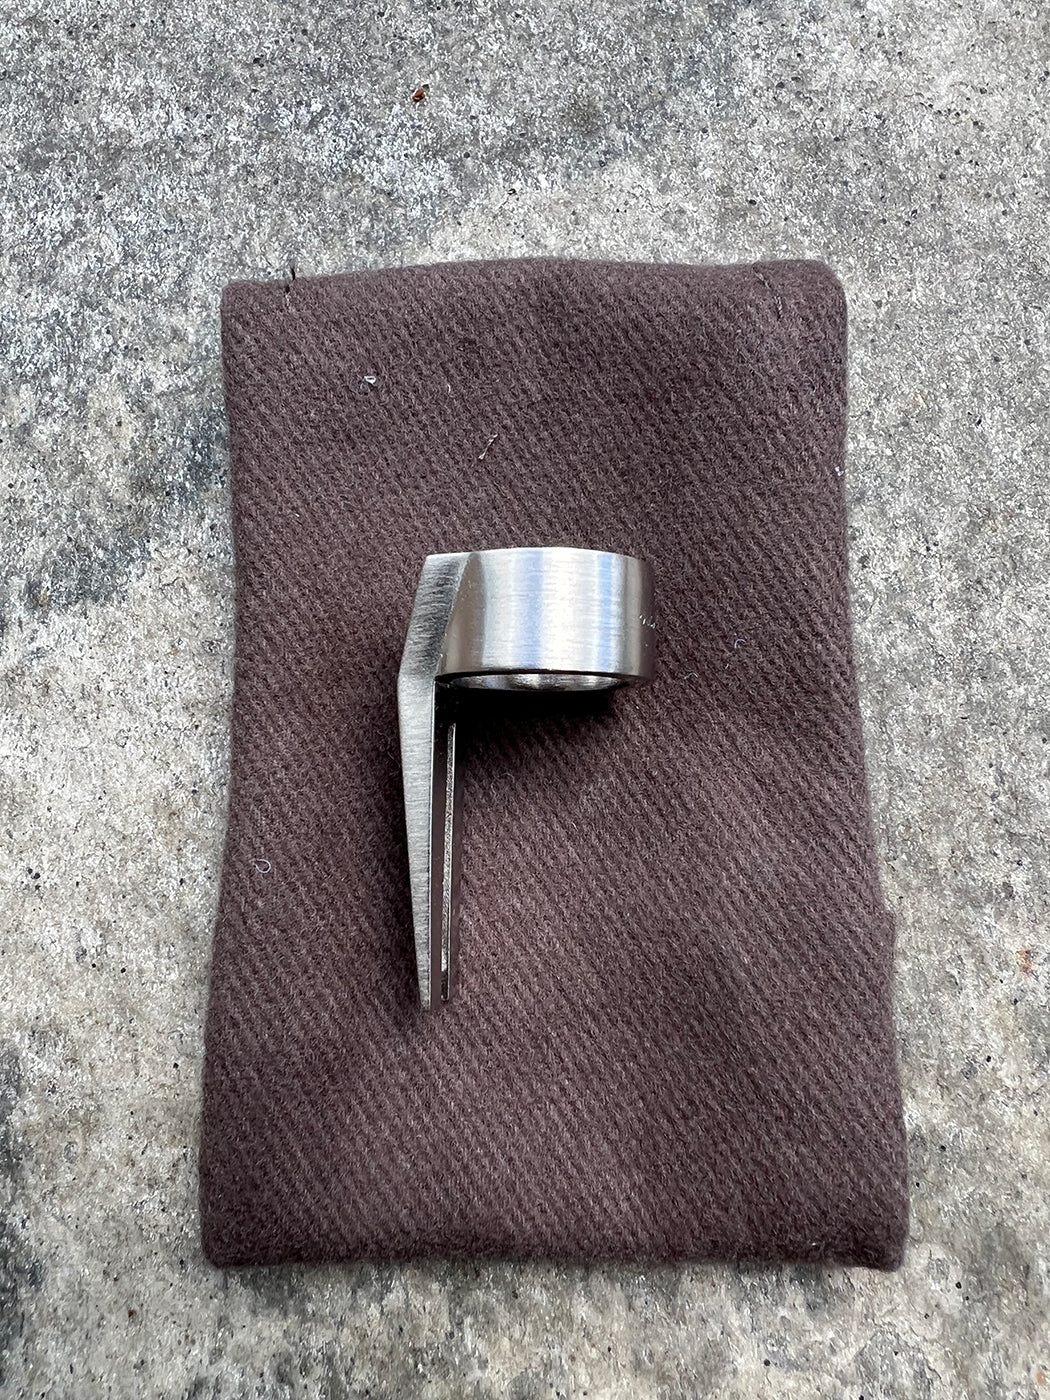 Rick Owens Open trunk ring